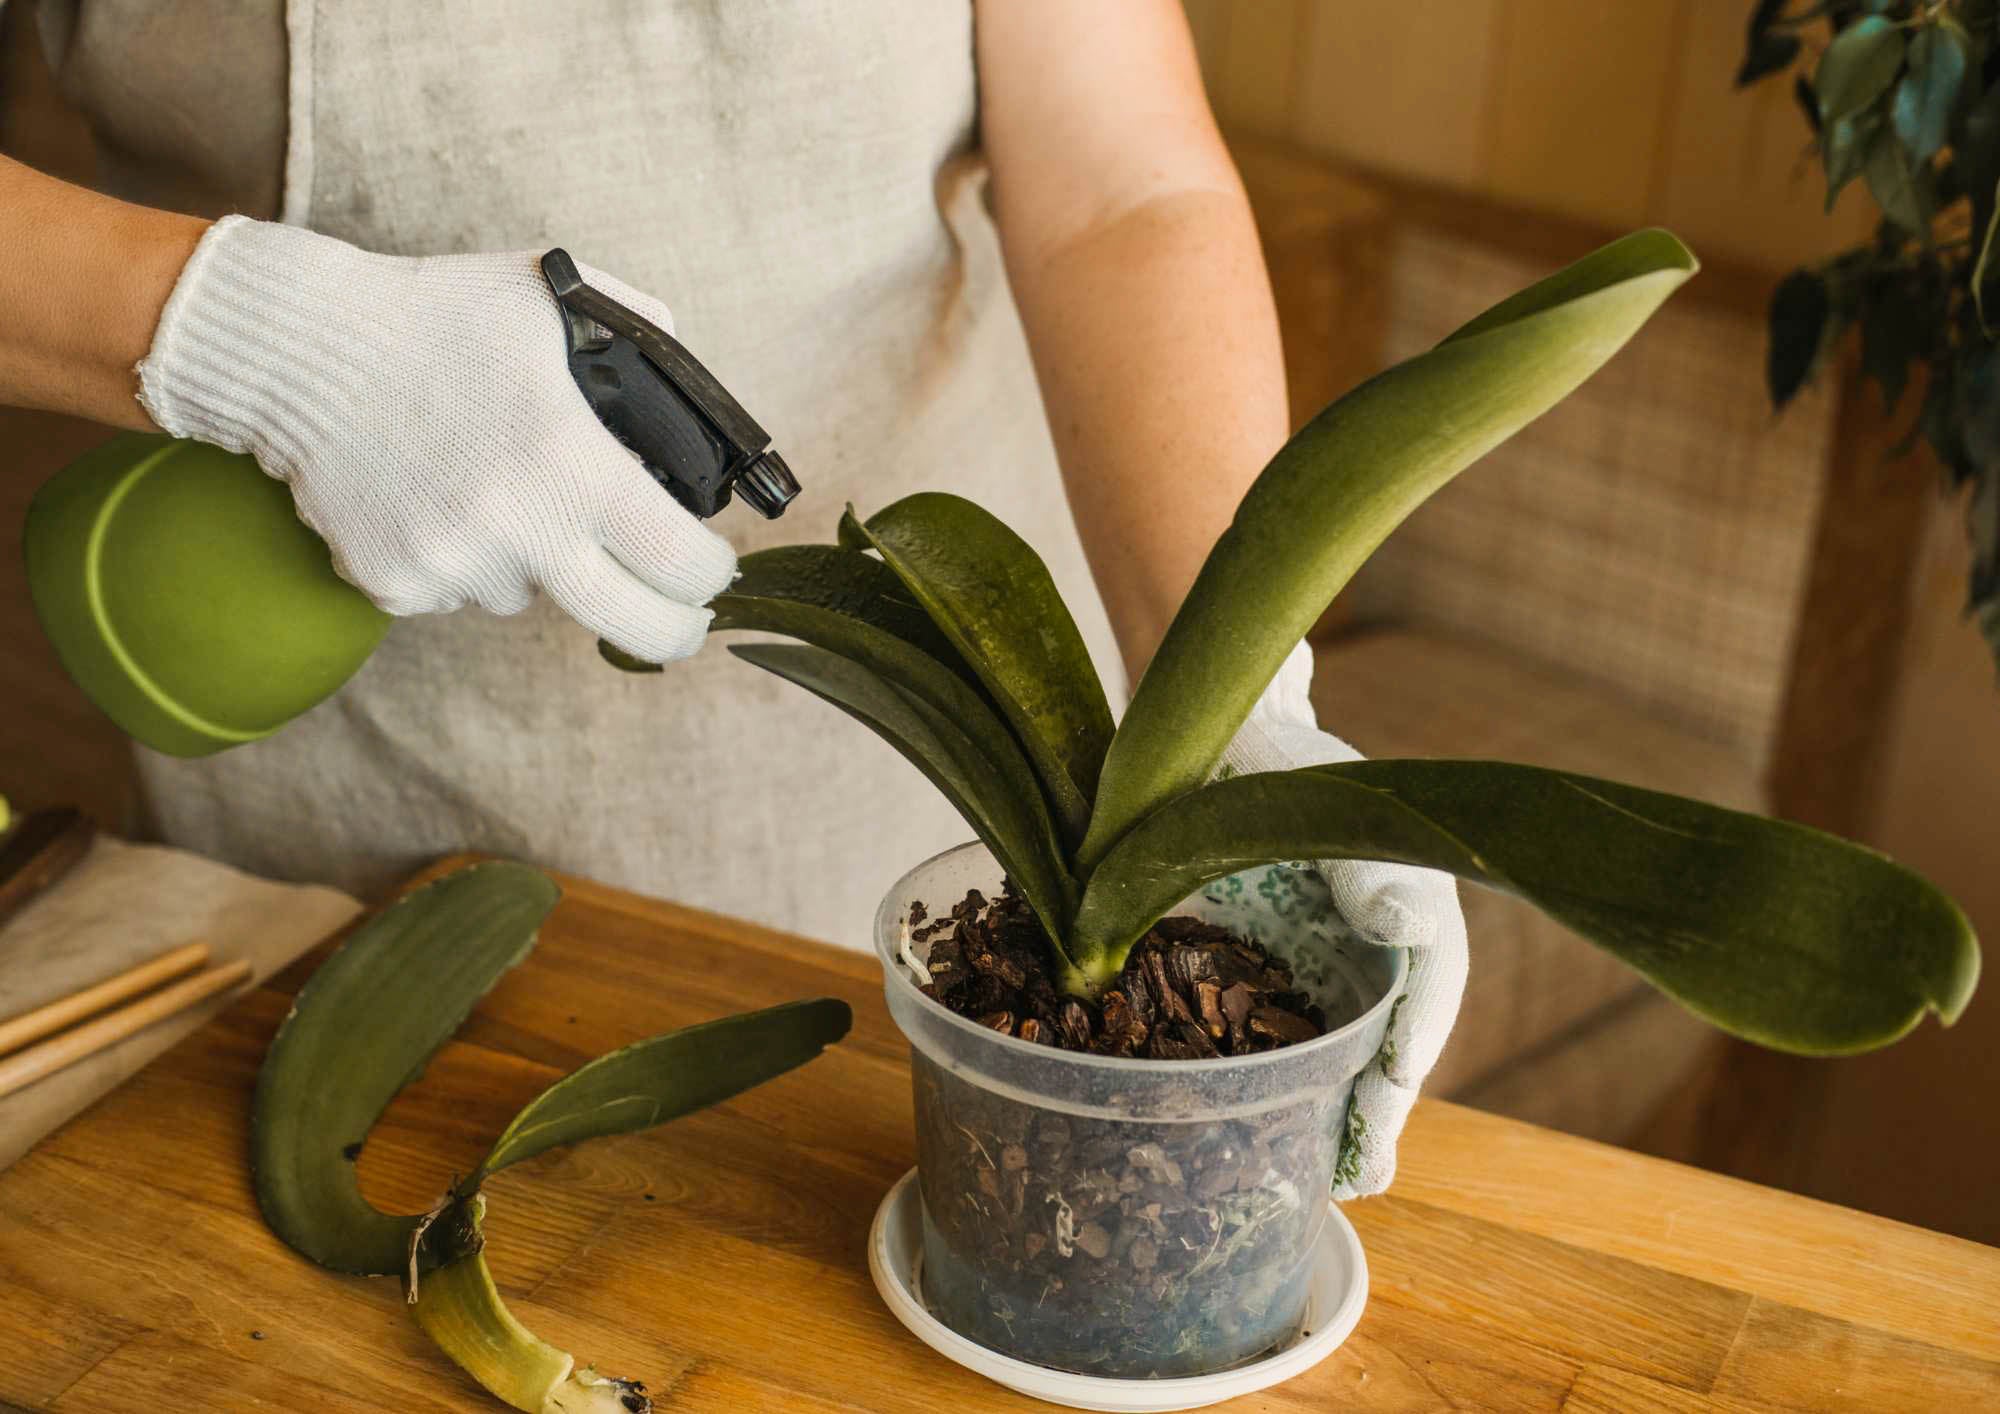 orchid care tips